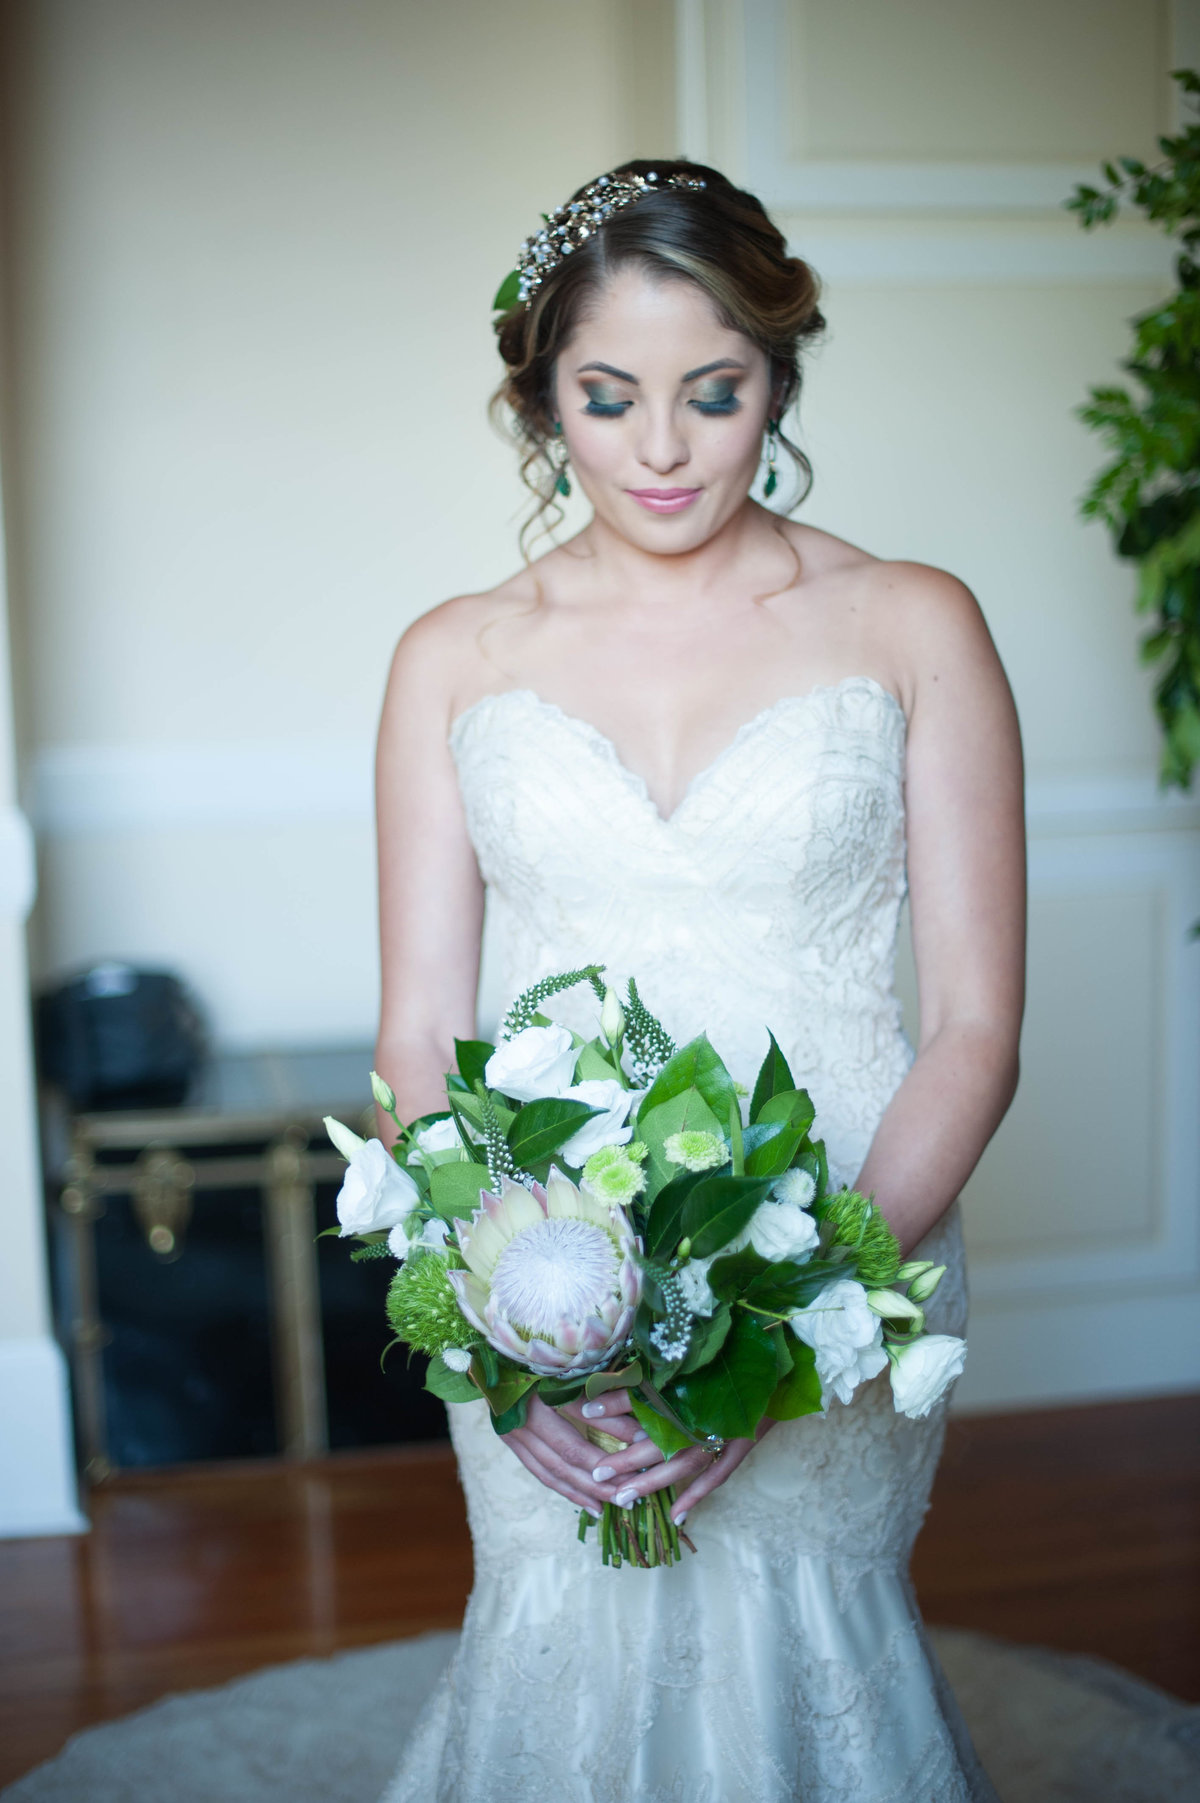 Bridal bouquet by Bridezilla Events and Floral for the romantic sophisticated brides. Romantic wedding photography by Faria Munmun in Redlands California.